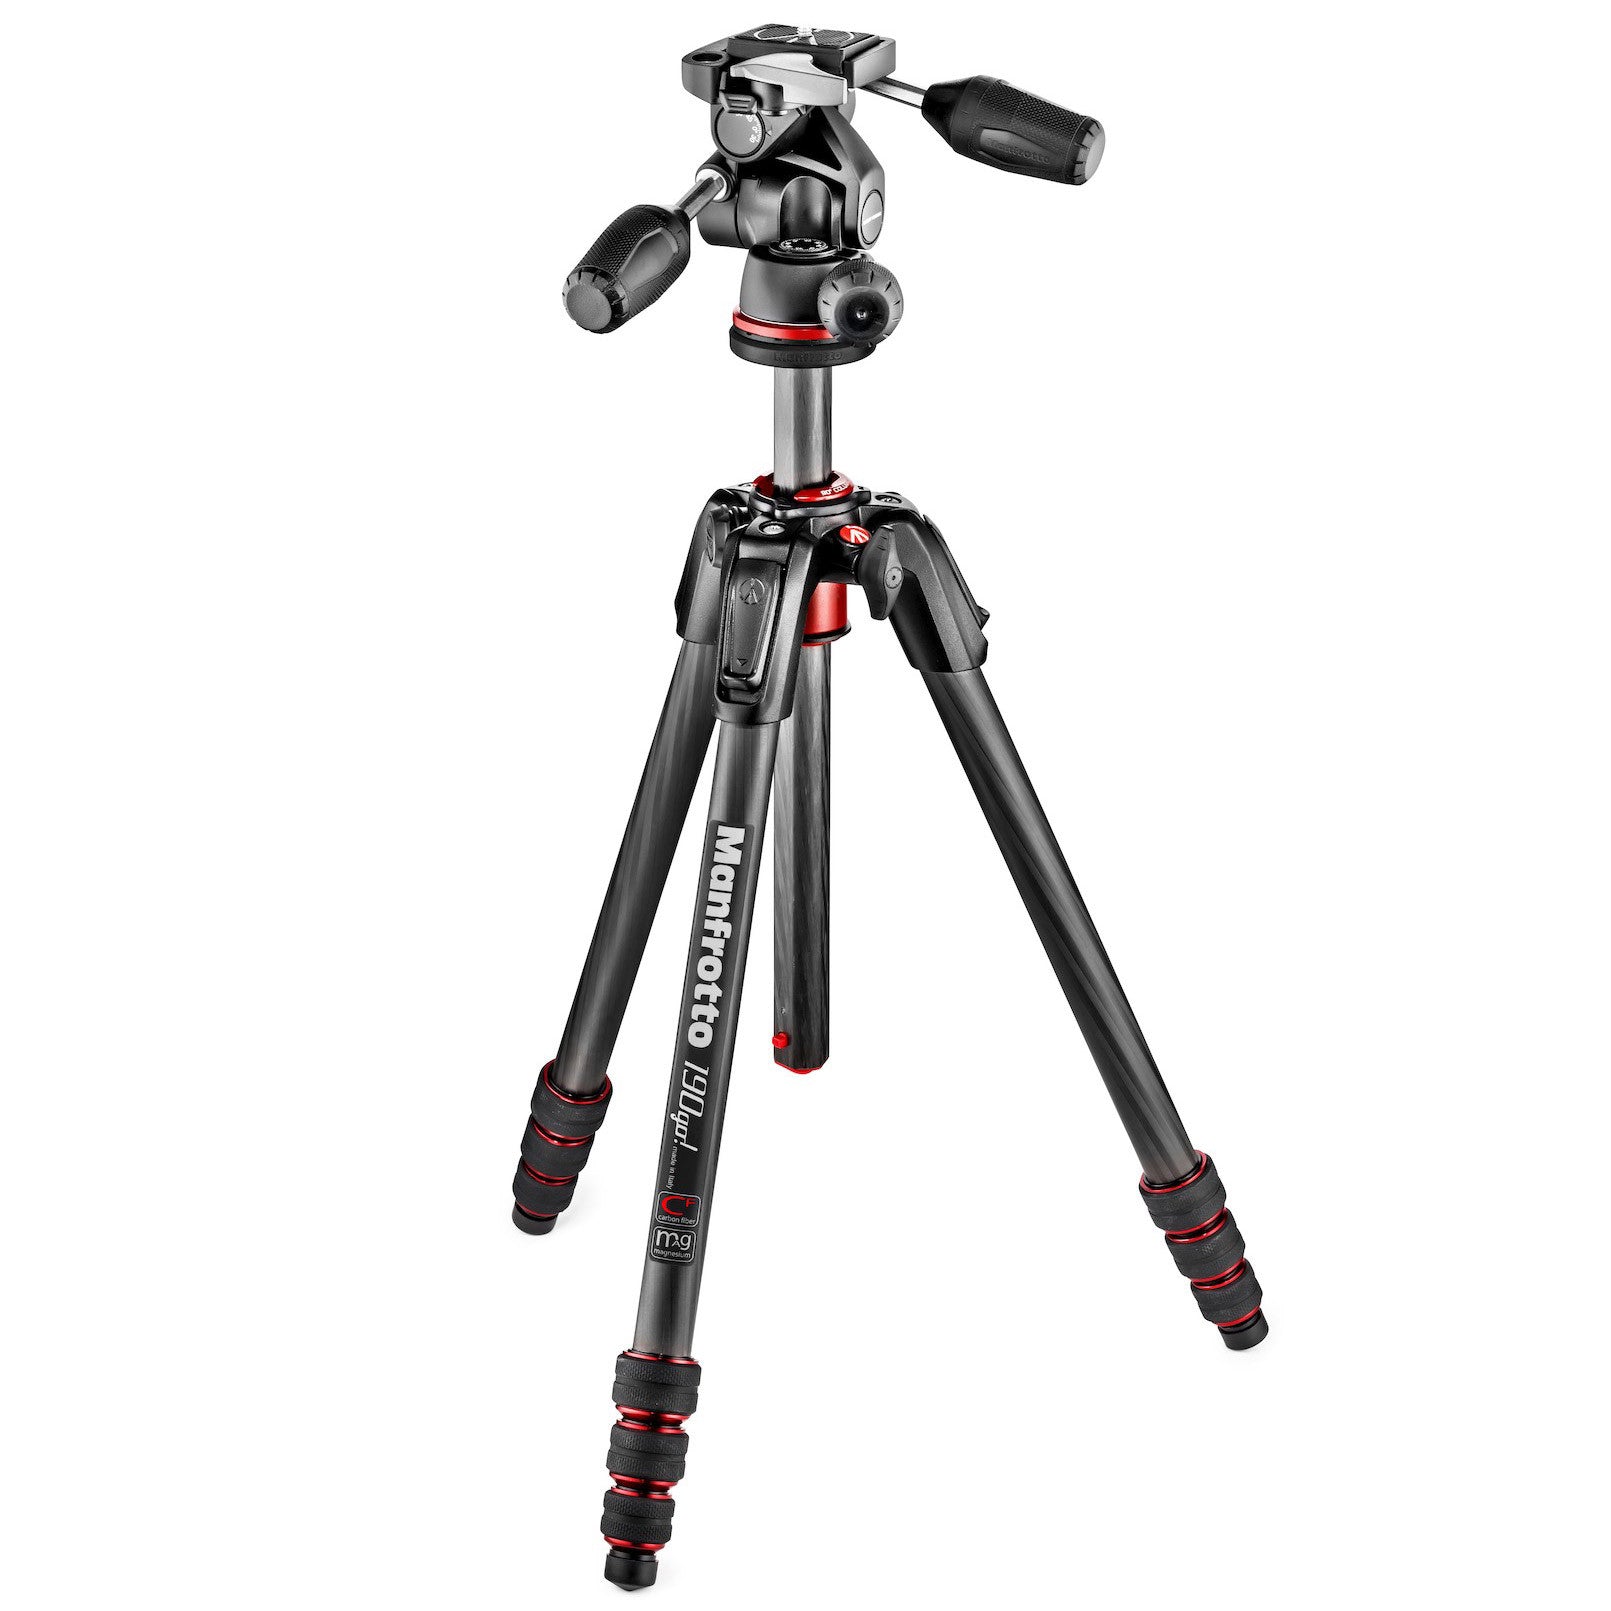 Manfrotto 190go! Carbon Fiber 4 Section Tripod with 3 Way Head